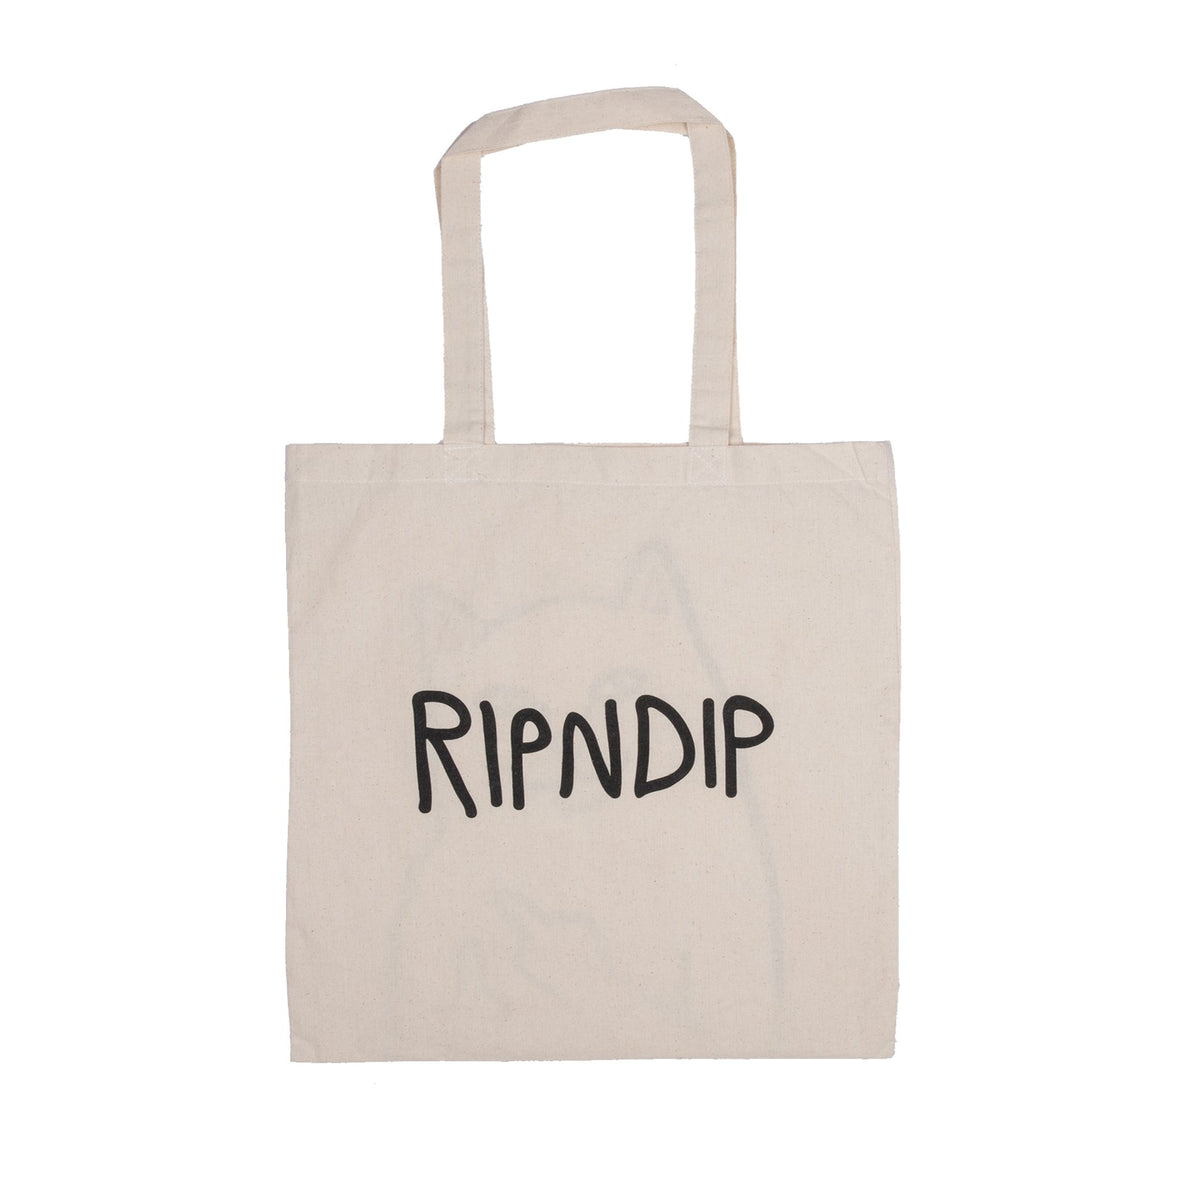 RIPNDIP - OG Lord Nermal Tote Bag, Natural Canvas – The Giant Peach